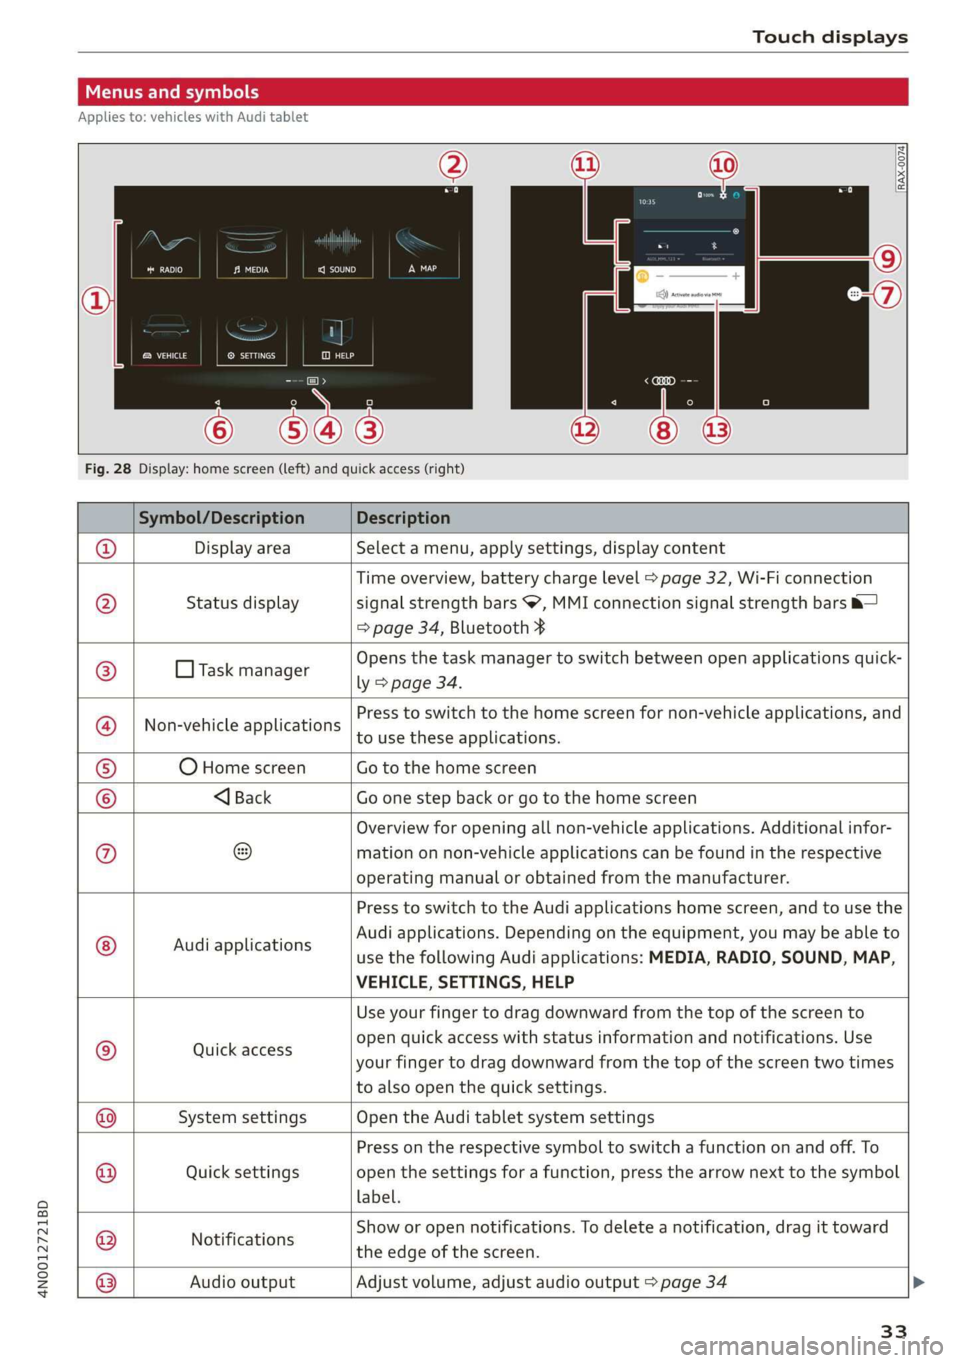 AUDI A8 2020  Owners Manual 4N0012721BD 
Touch displays 
  
Menus and symbols   
Applies to: vehicles with Audi tablet 
  
emsa || | cea 
Rats ® SETTINGS 
  
Cy 
  
  
  
  
  
Fig. 28 Display: home screen (left) and quick acce